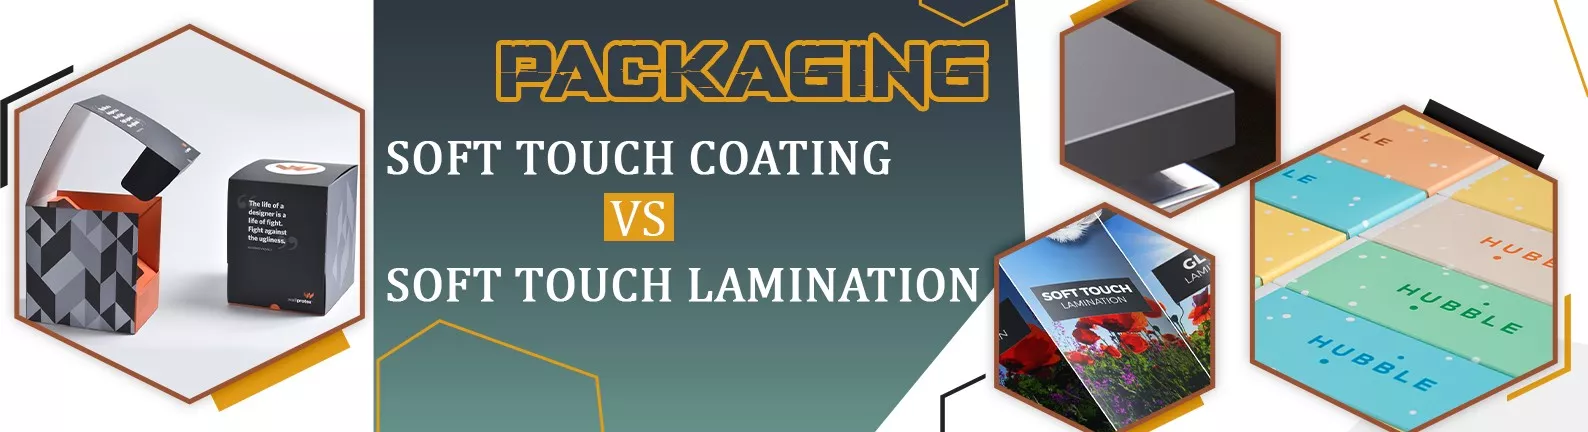 Packaging blog: soft touch coating vs soft lamination